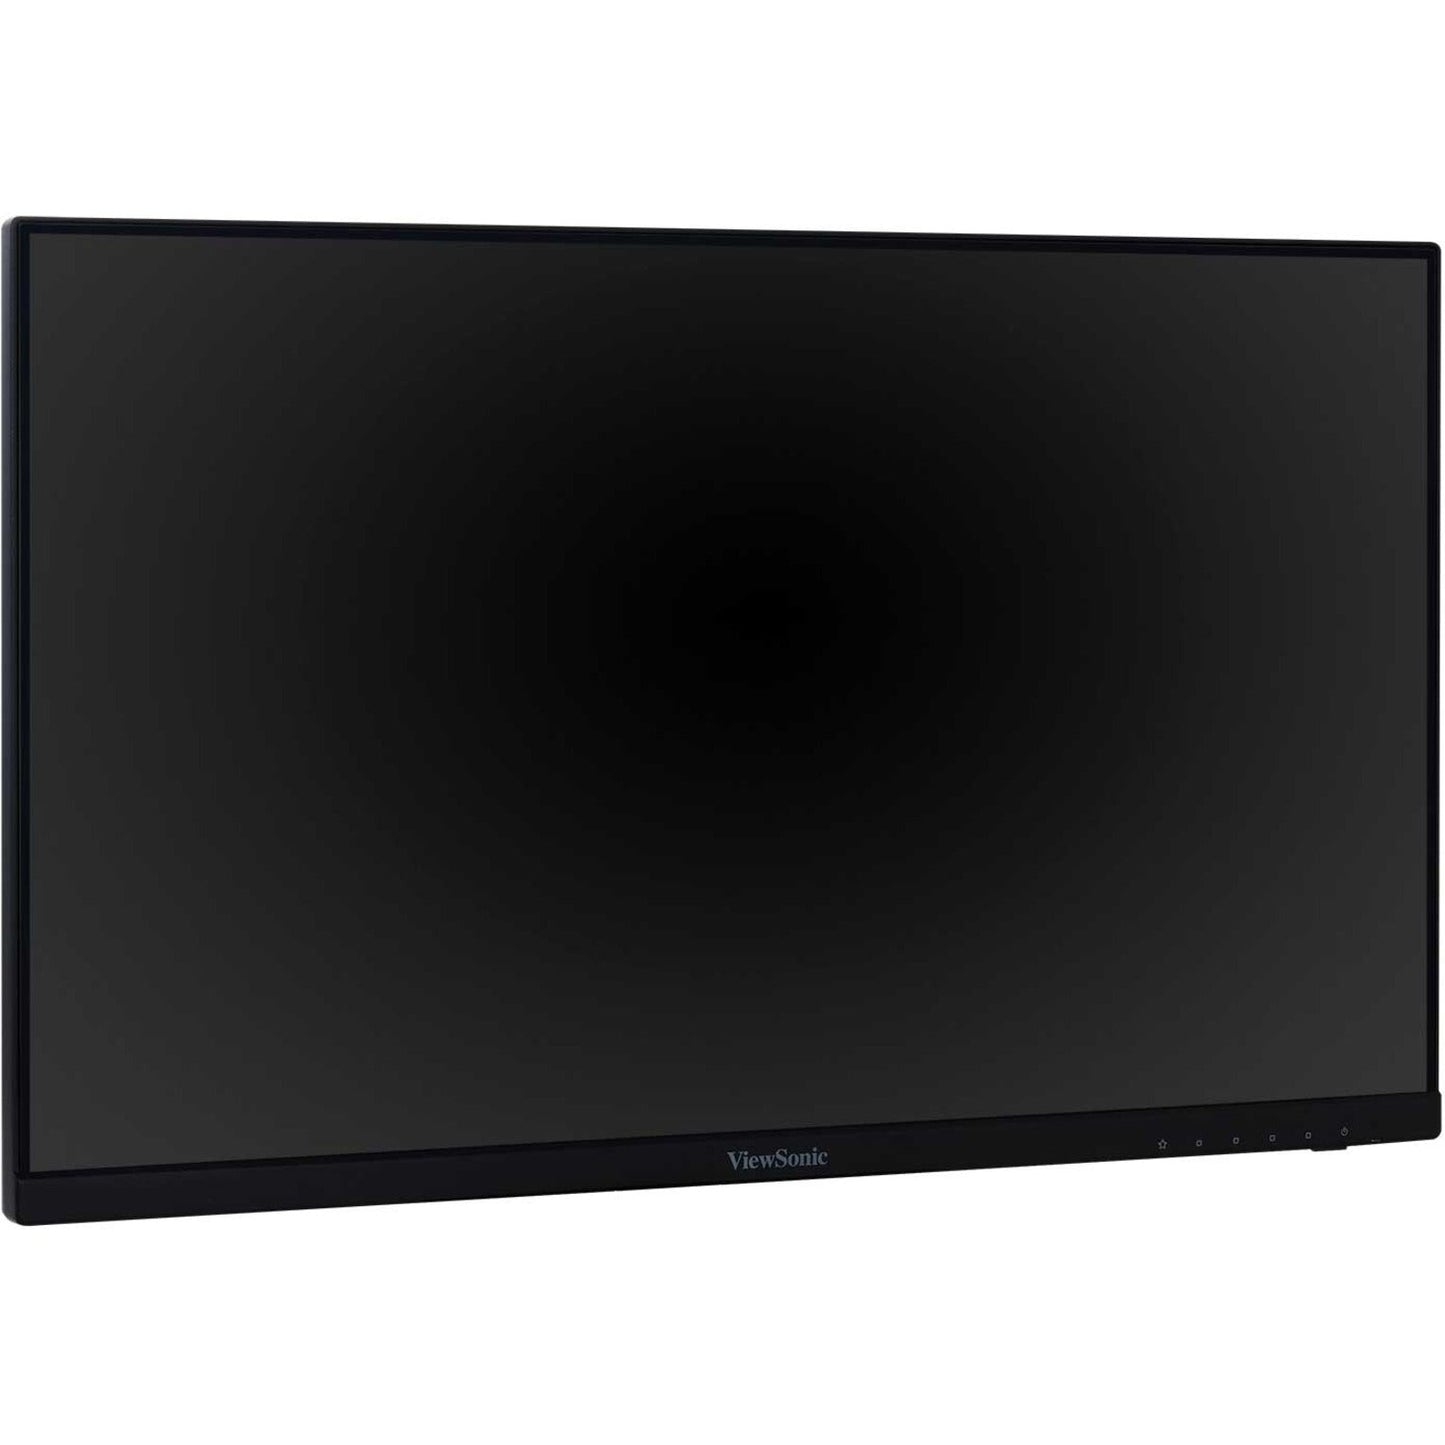 ViewSonic VA2256-MHD_H2 Dual Pack Head-Only 1080p IPS Monitors with Ultra-Thin Bezels HDMI DisplayPort and VGA for Home and Office